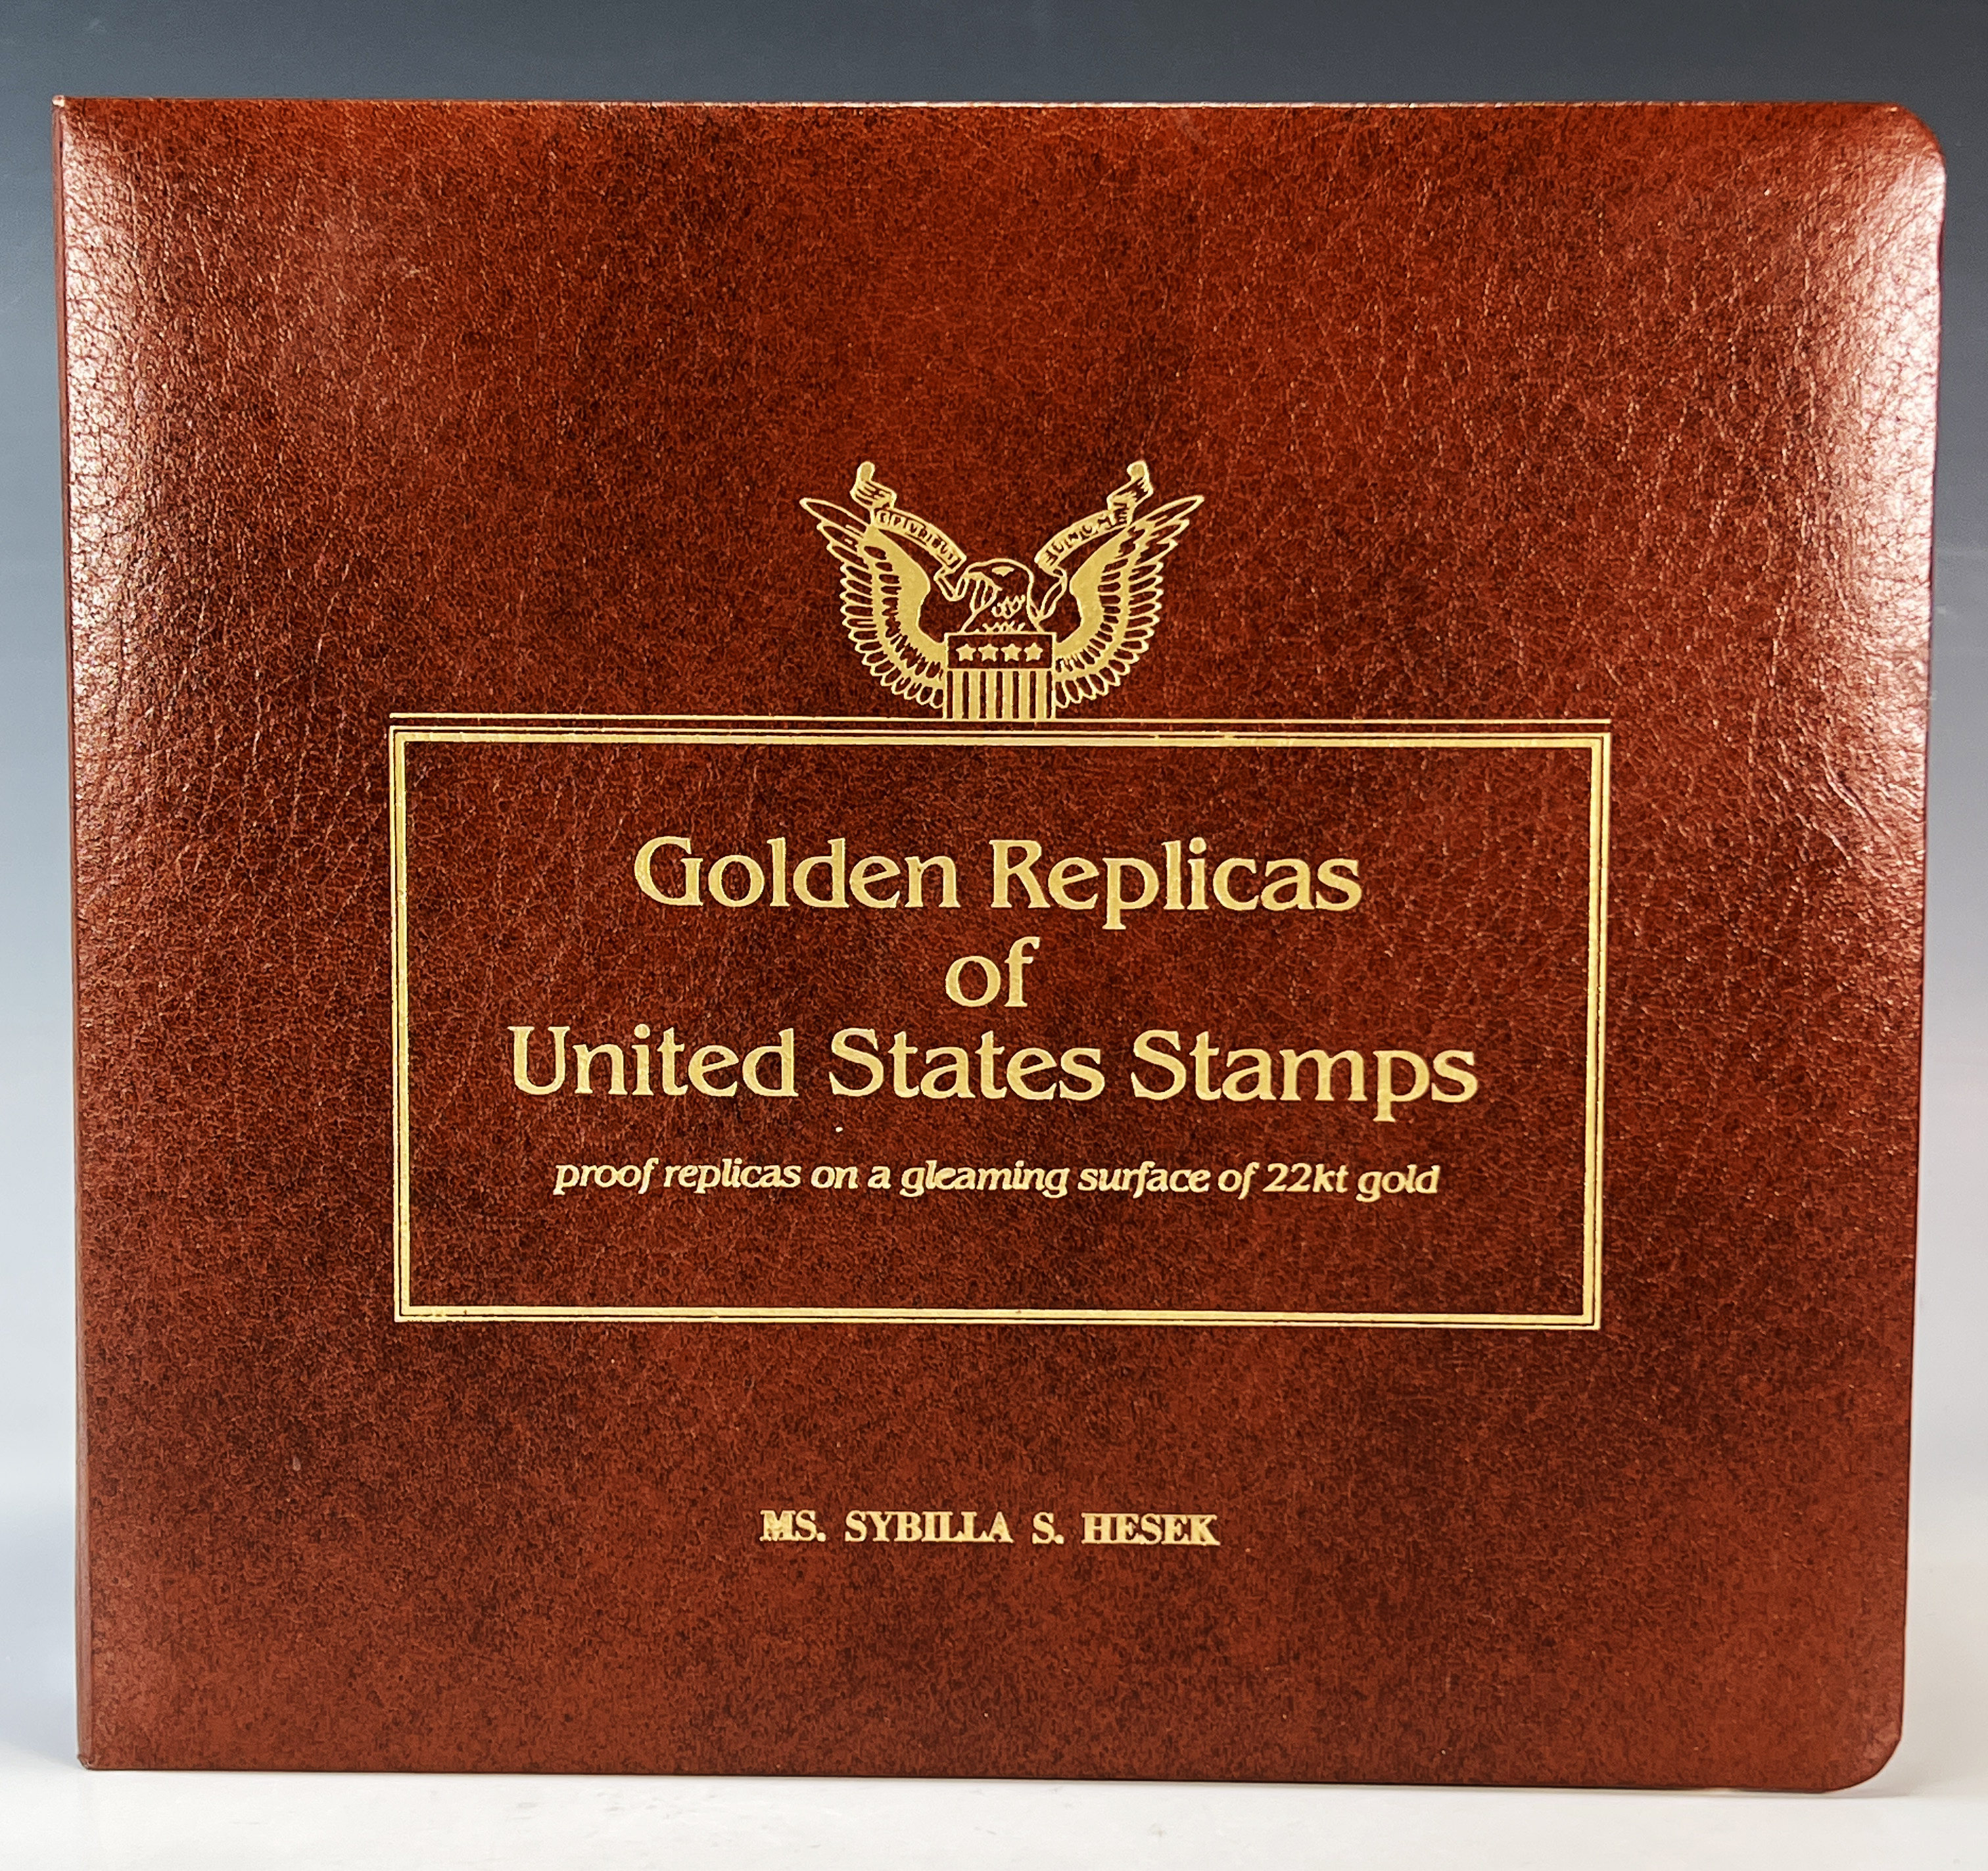 Golden Replicas Of United States Stamps 22k Gold image 1